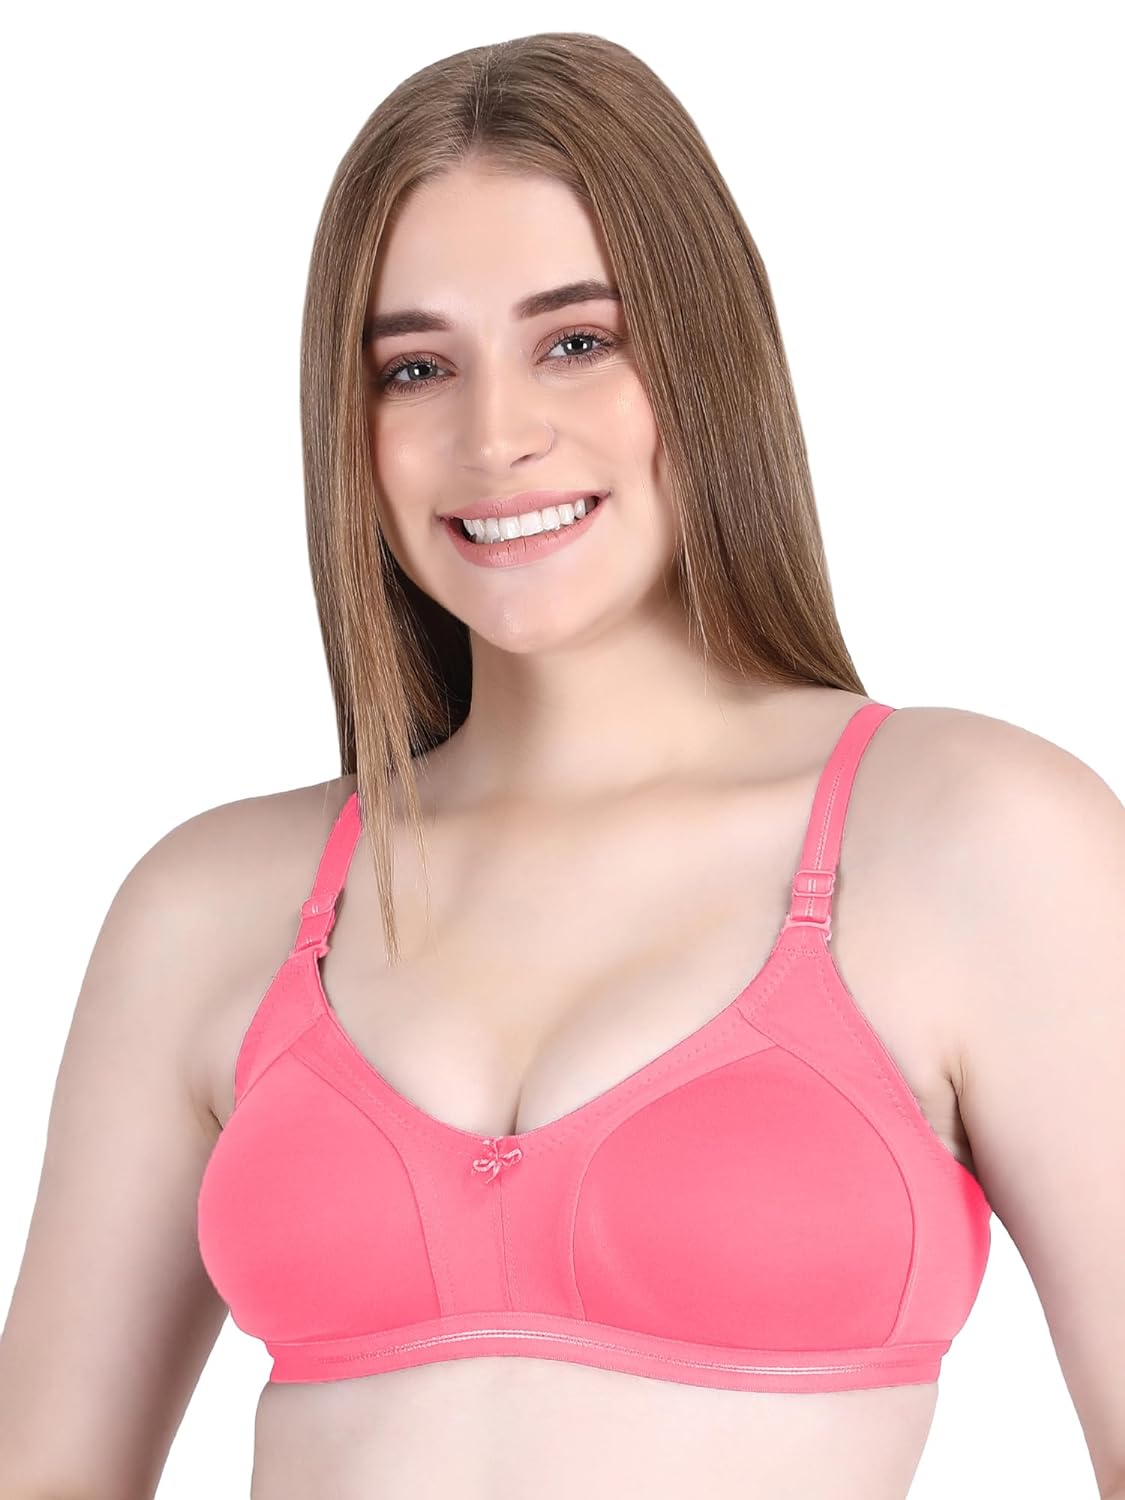 BODYSIZE Women’s Seamless Full Coverage Wirefree Cotton Bra | Everyday Wear, Sweat Absorbent, Soft Cotton Fabric for Ultimate Comfort